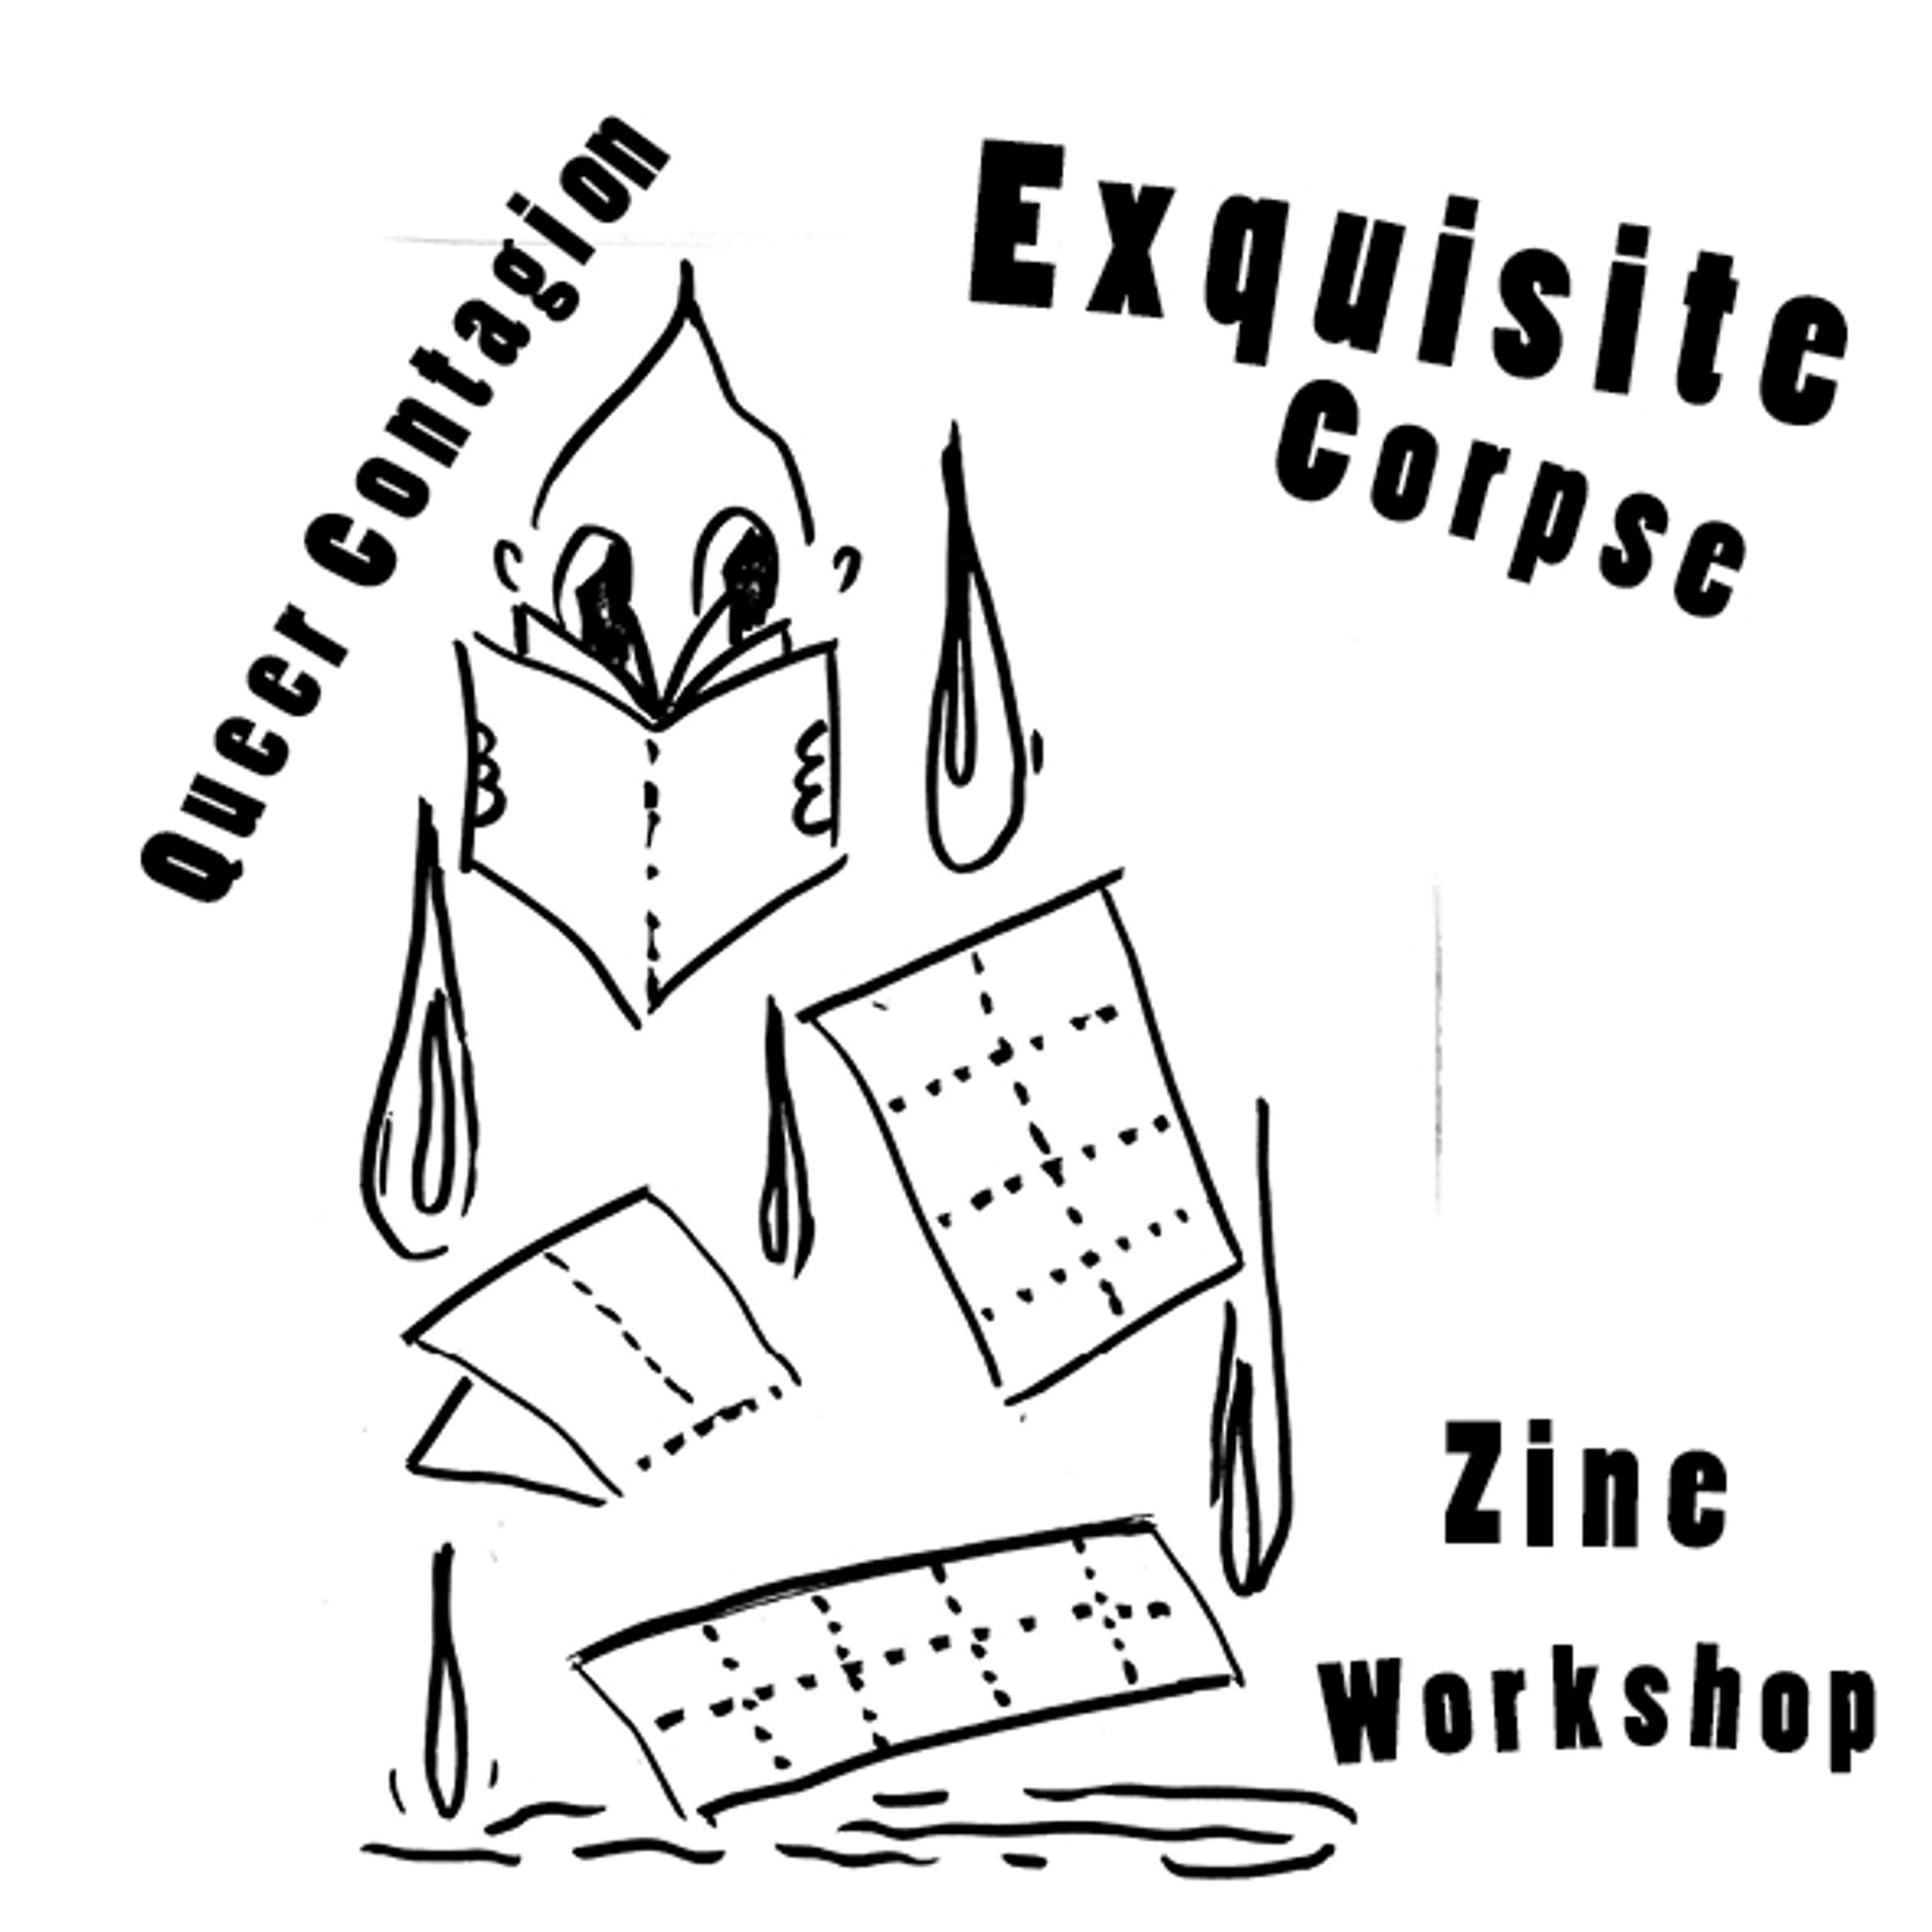 Contagious & Queer: Exquisite Corpse: Archival material and zine making workshop